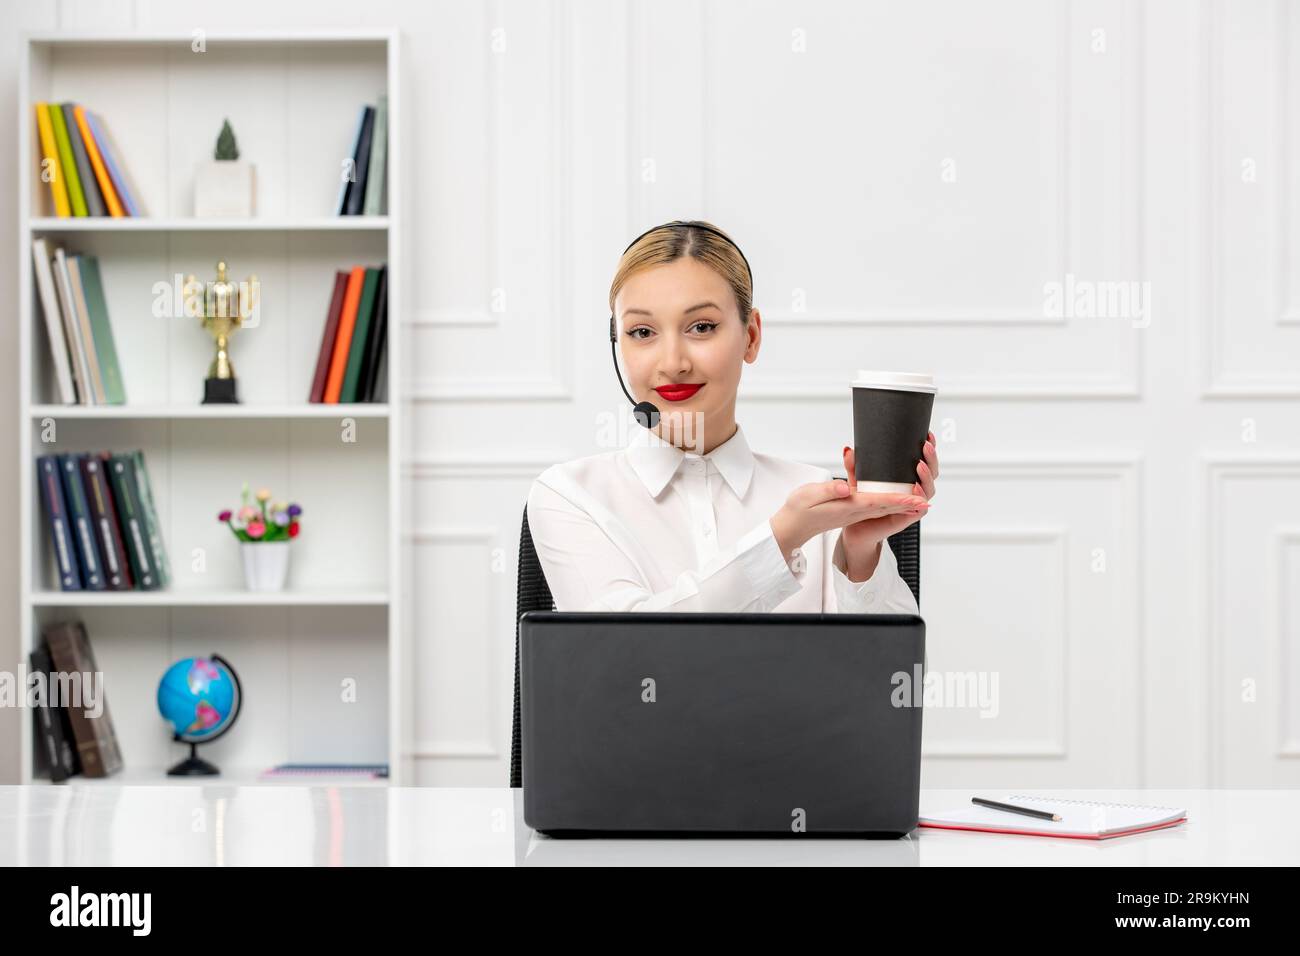 customer service cute blonde girl office shirt with headset and computer holding a coffee cup Stock Photo